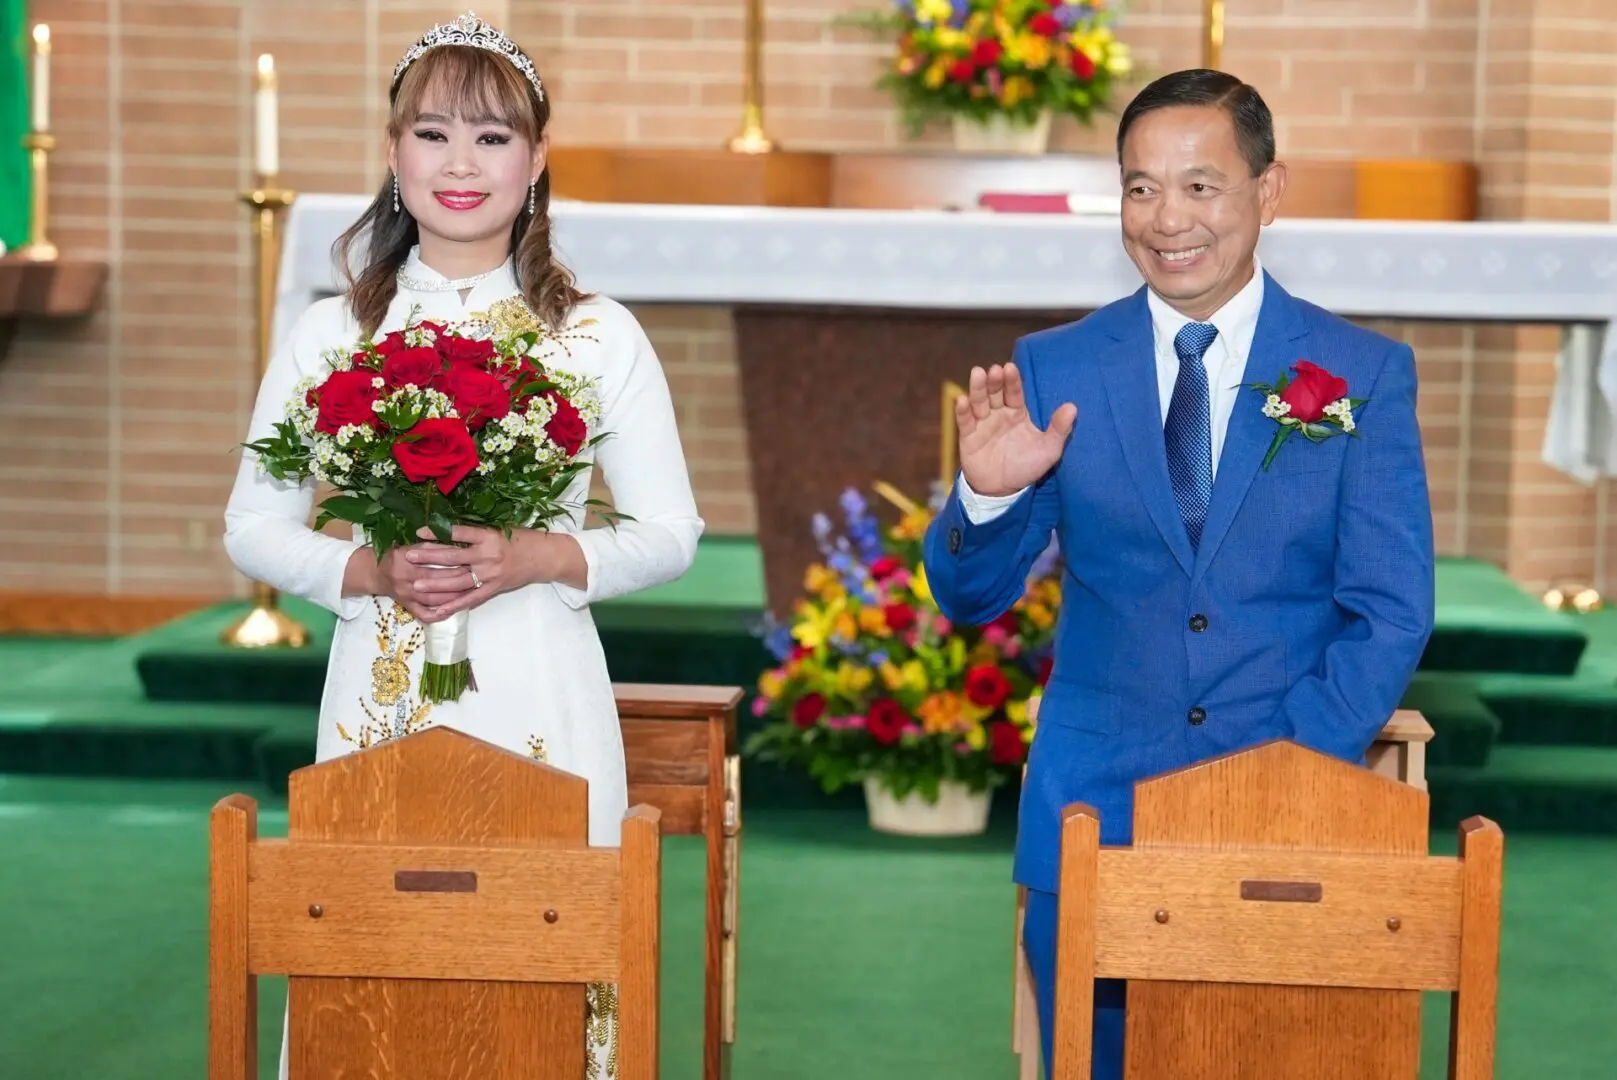 A man and woman standing in front of pews holding flowers.